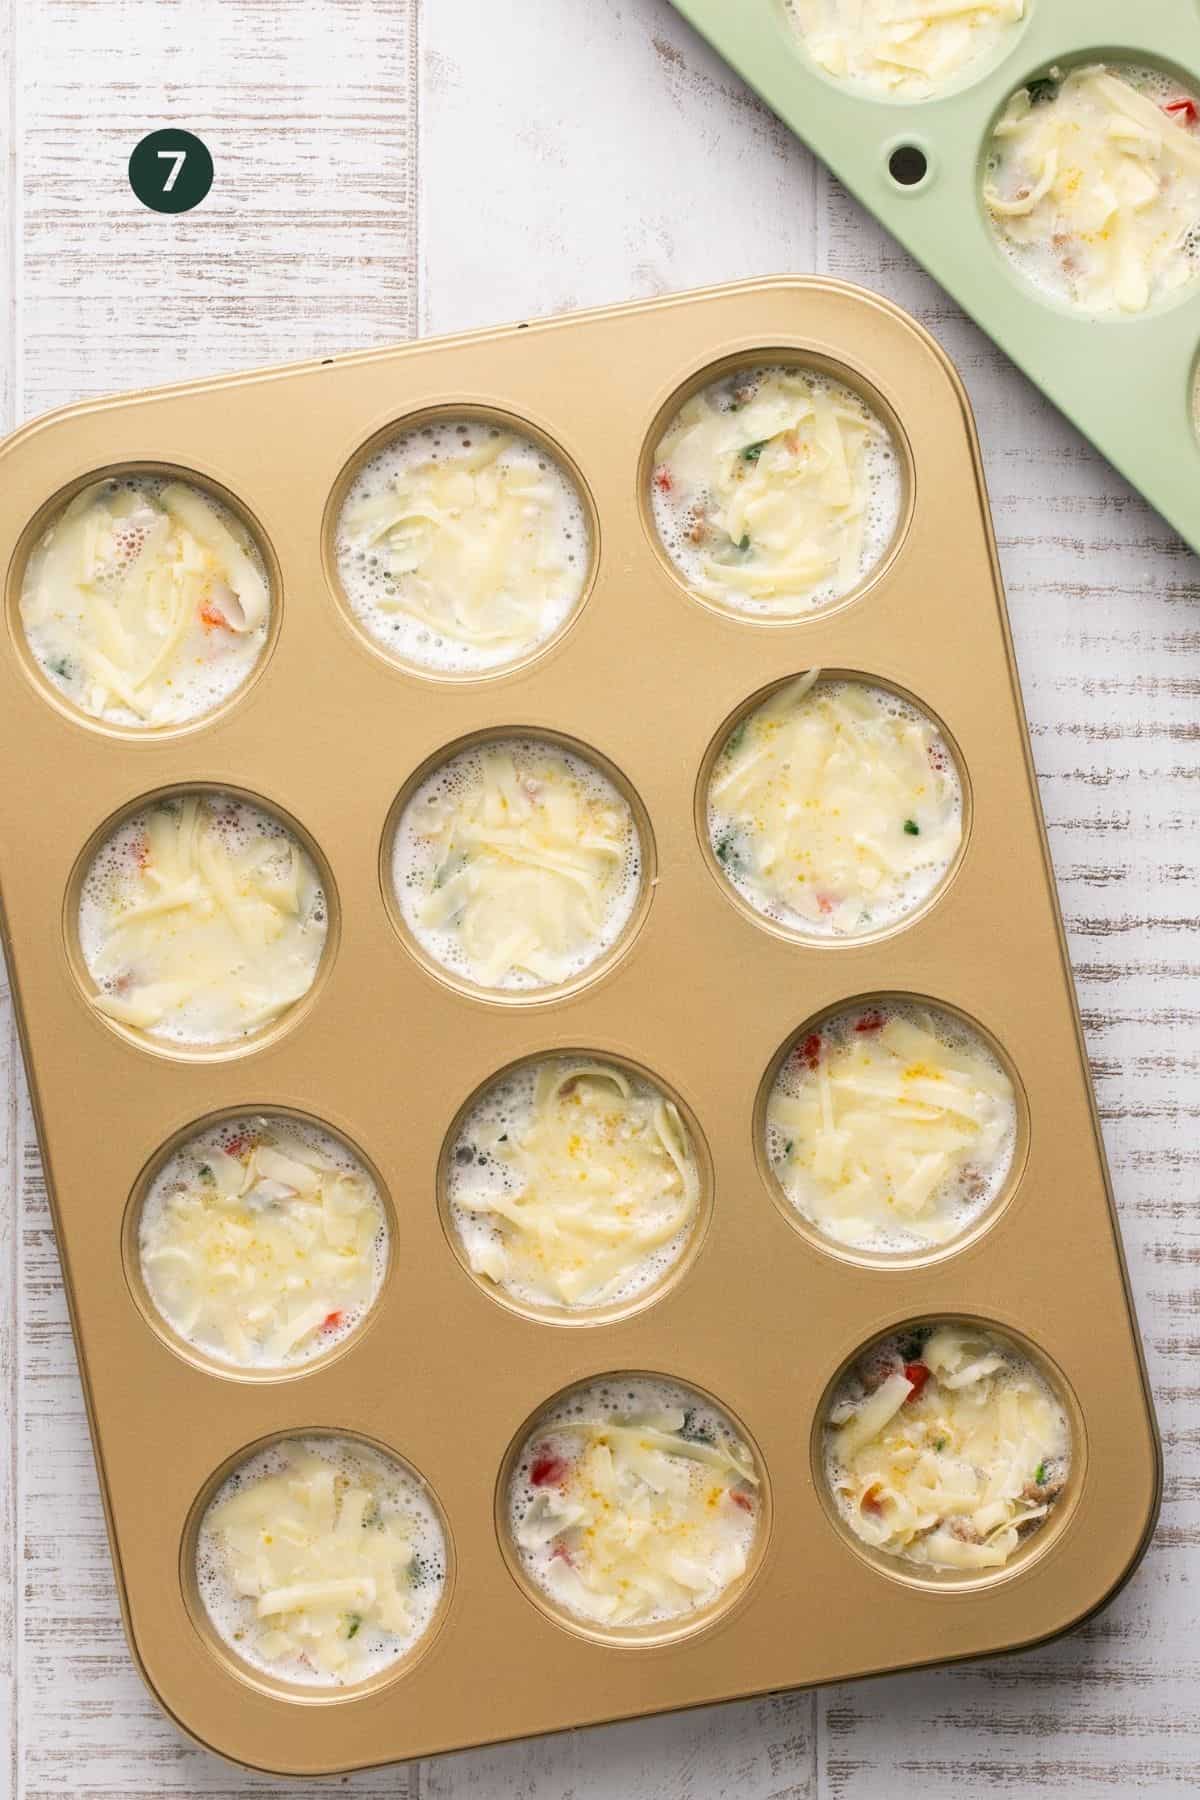 Cheese added to each muffin tin.